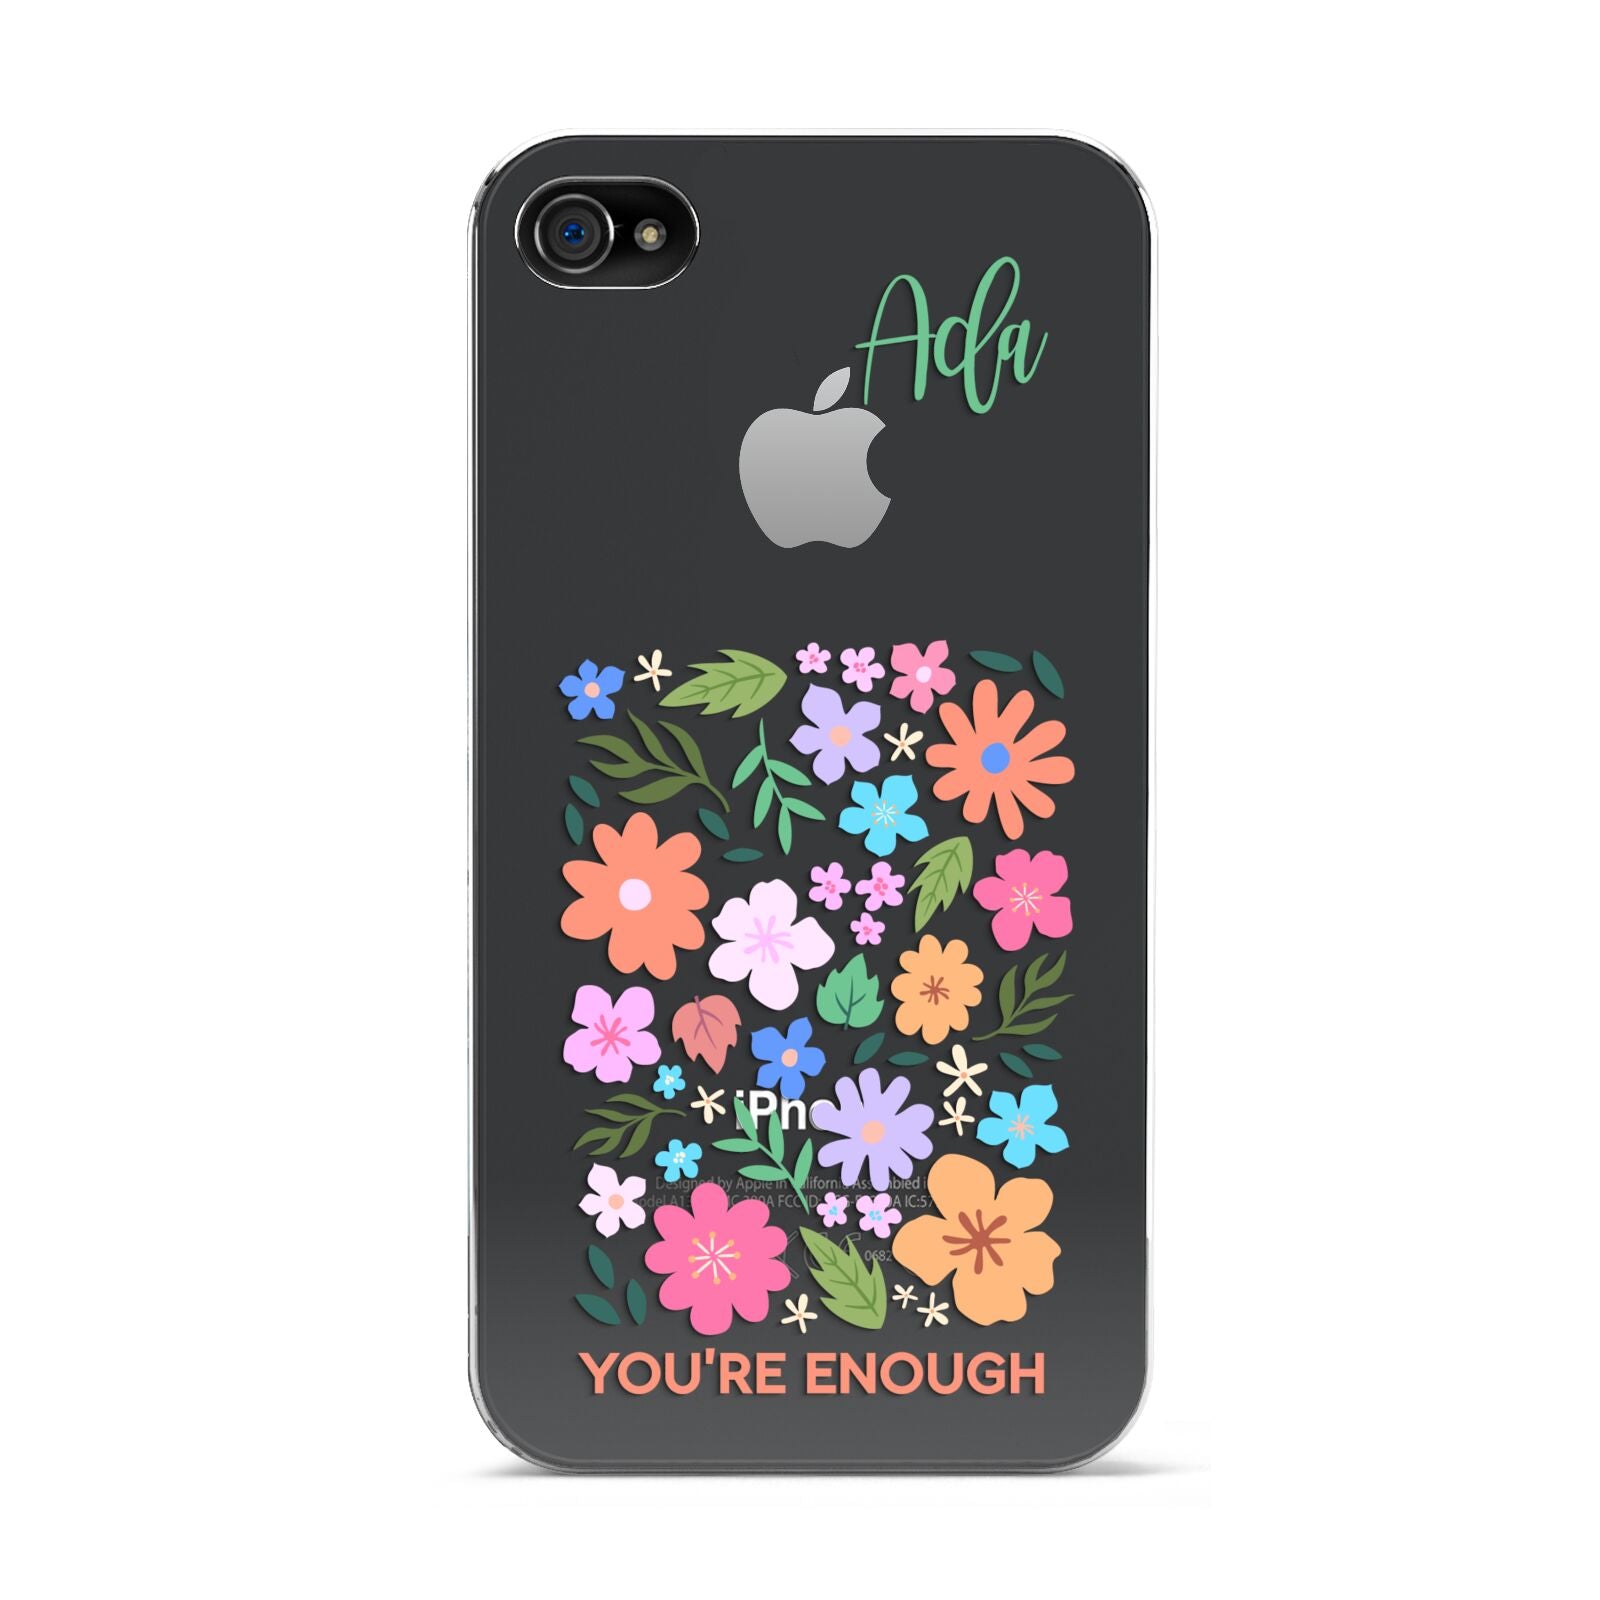 Floral Poster Apple iPhone 4s Case